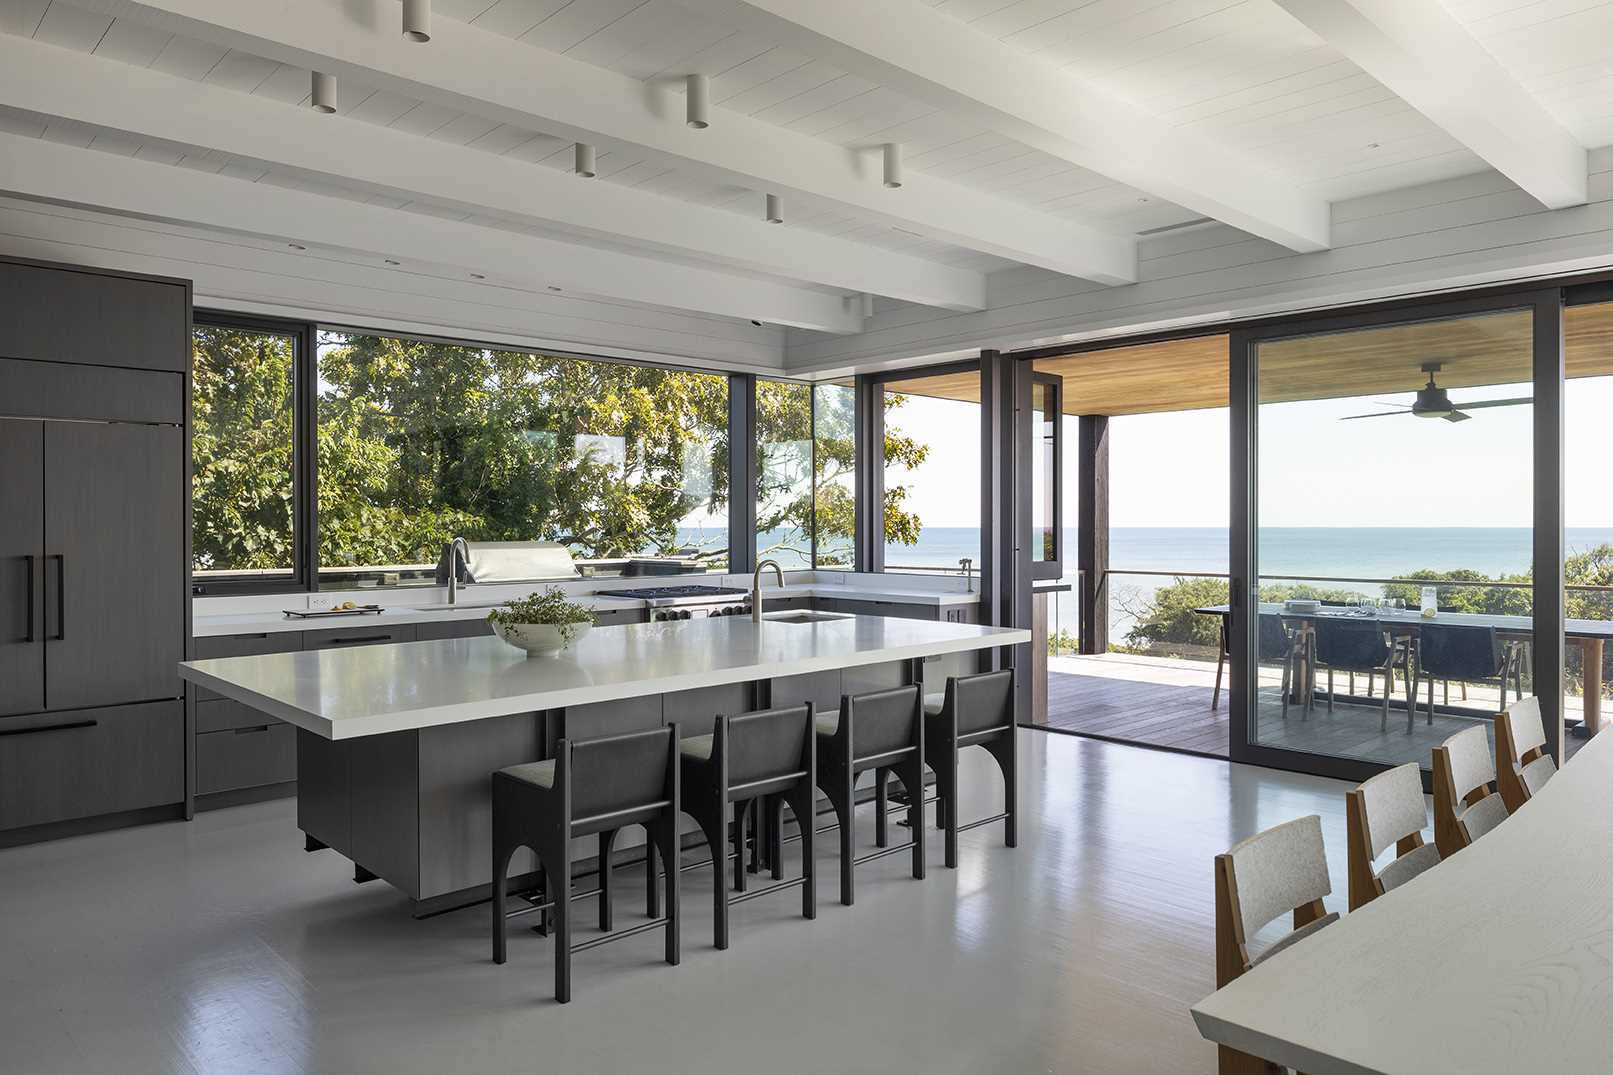 A modern kitchen with a large island opens to a covered deck with outdoor dining.